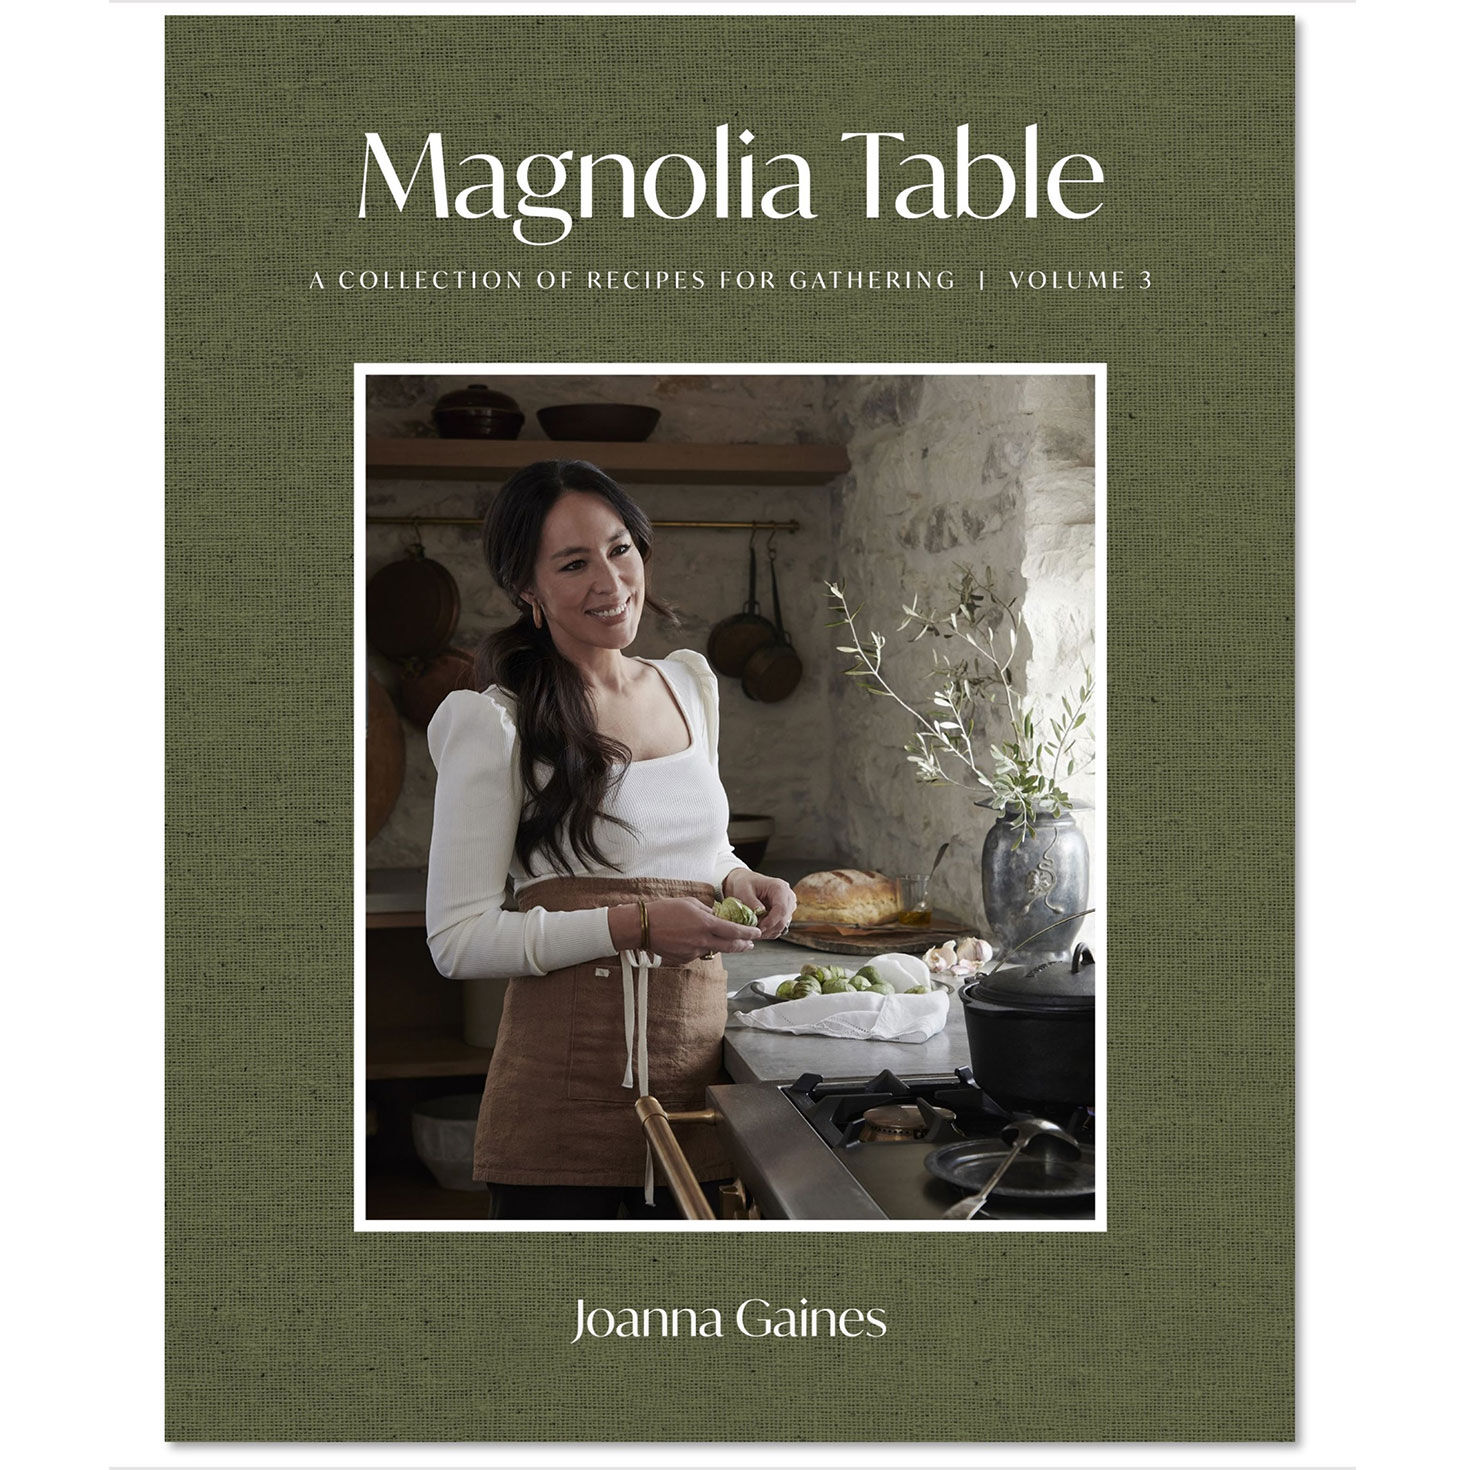 Magnolia Table Volume 3: A Collection of Recipes for Gathering Cookbook for only USD 40.00 | Hallmark